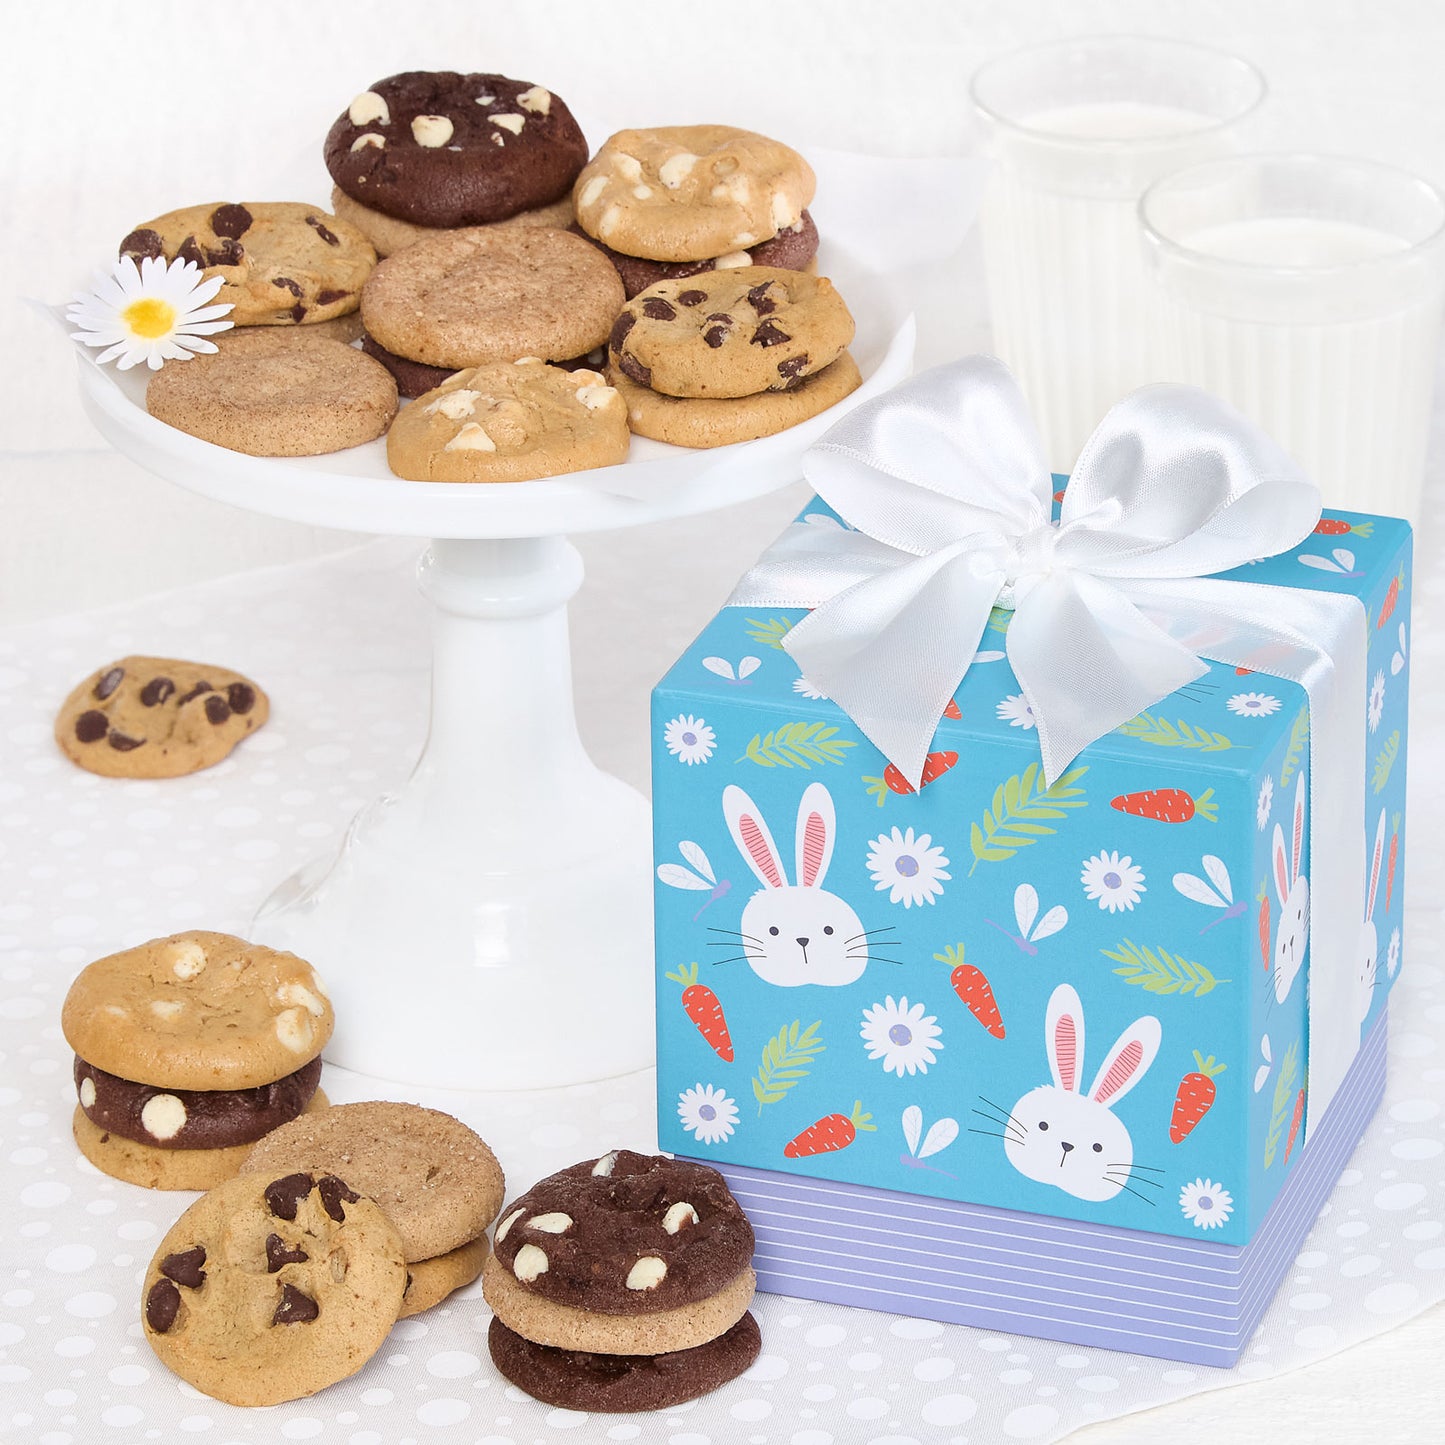 Mini blue Easter themed gift box surrounded by an assortment of nibblers